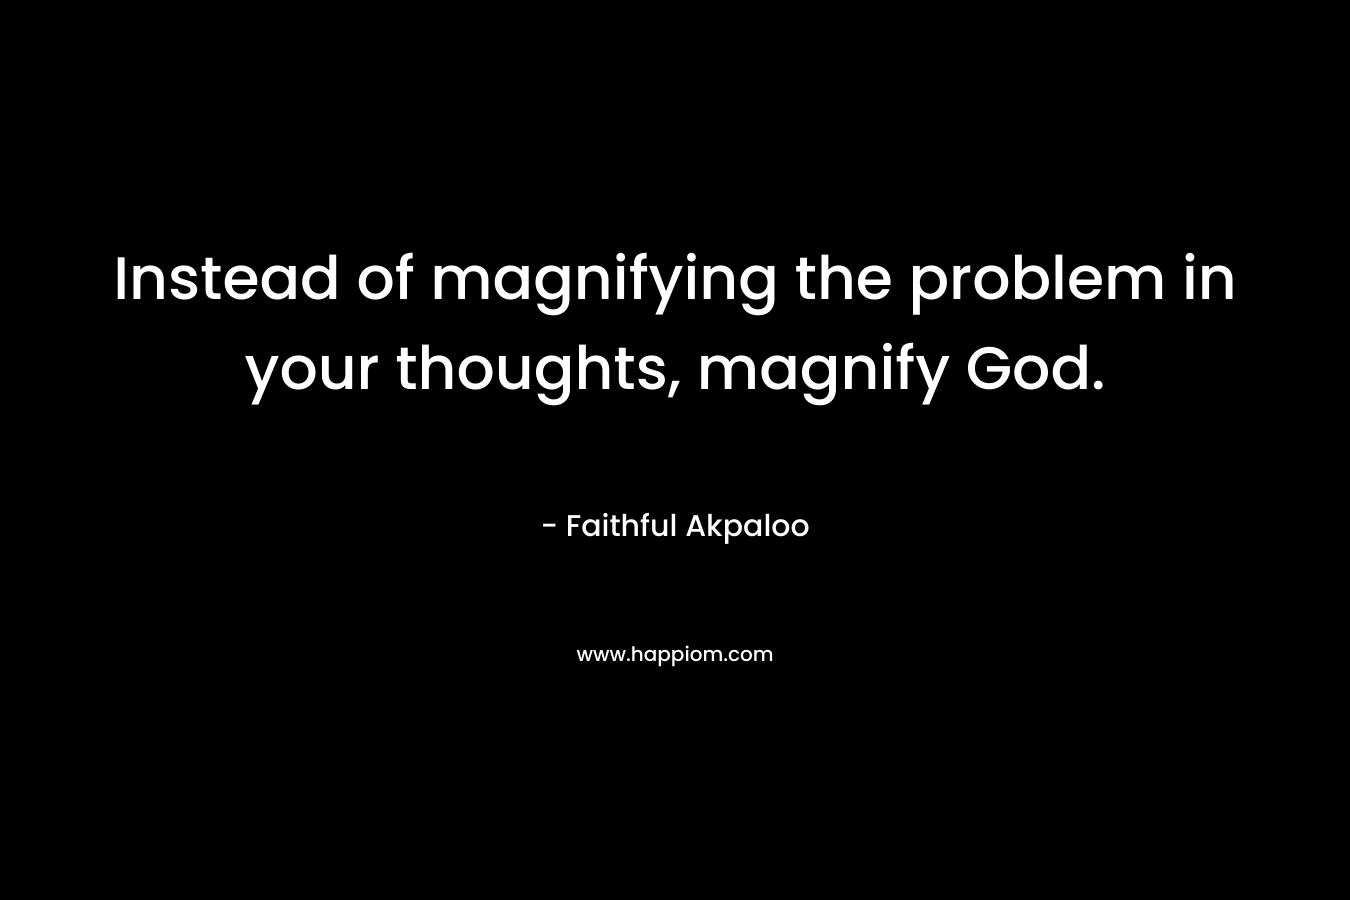 Instead of magnifying the problem in your thoughts, magnify God. – Faithful Akpaloo